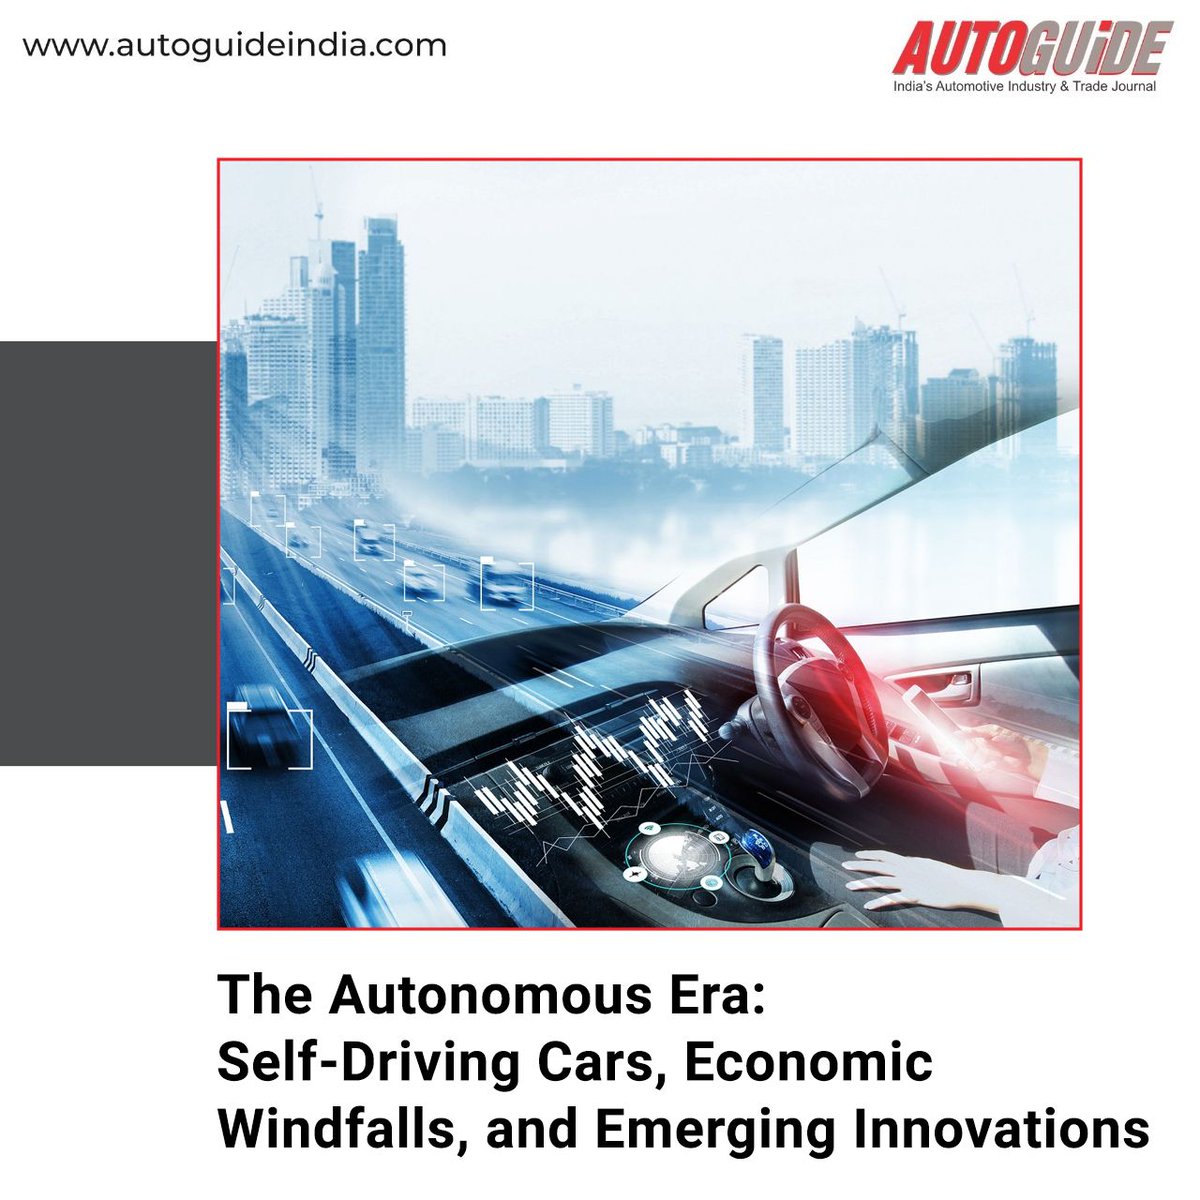 buff.ly/3QfSikk 
Unlocking the £66 billion windfall: Exploring the economic potential of self-driving cars and connected tech in the UK. #AutonomousDriving #TechInnovation #UKEconomy #FutureOfMobility #EconomicPotential #Innovation